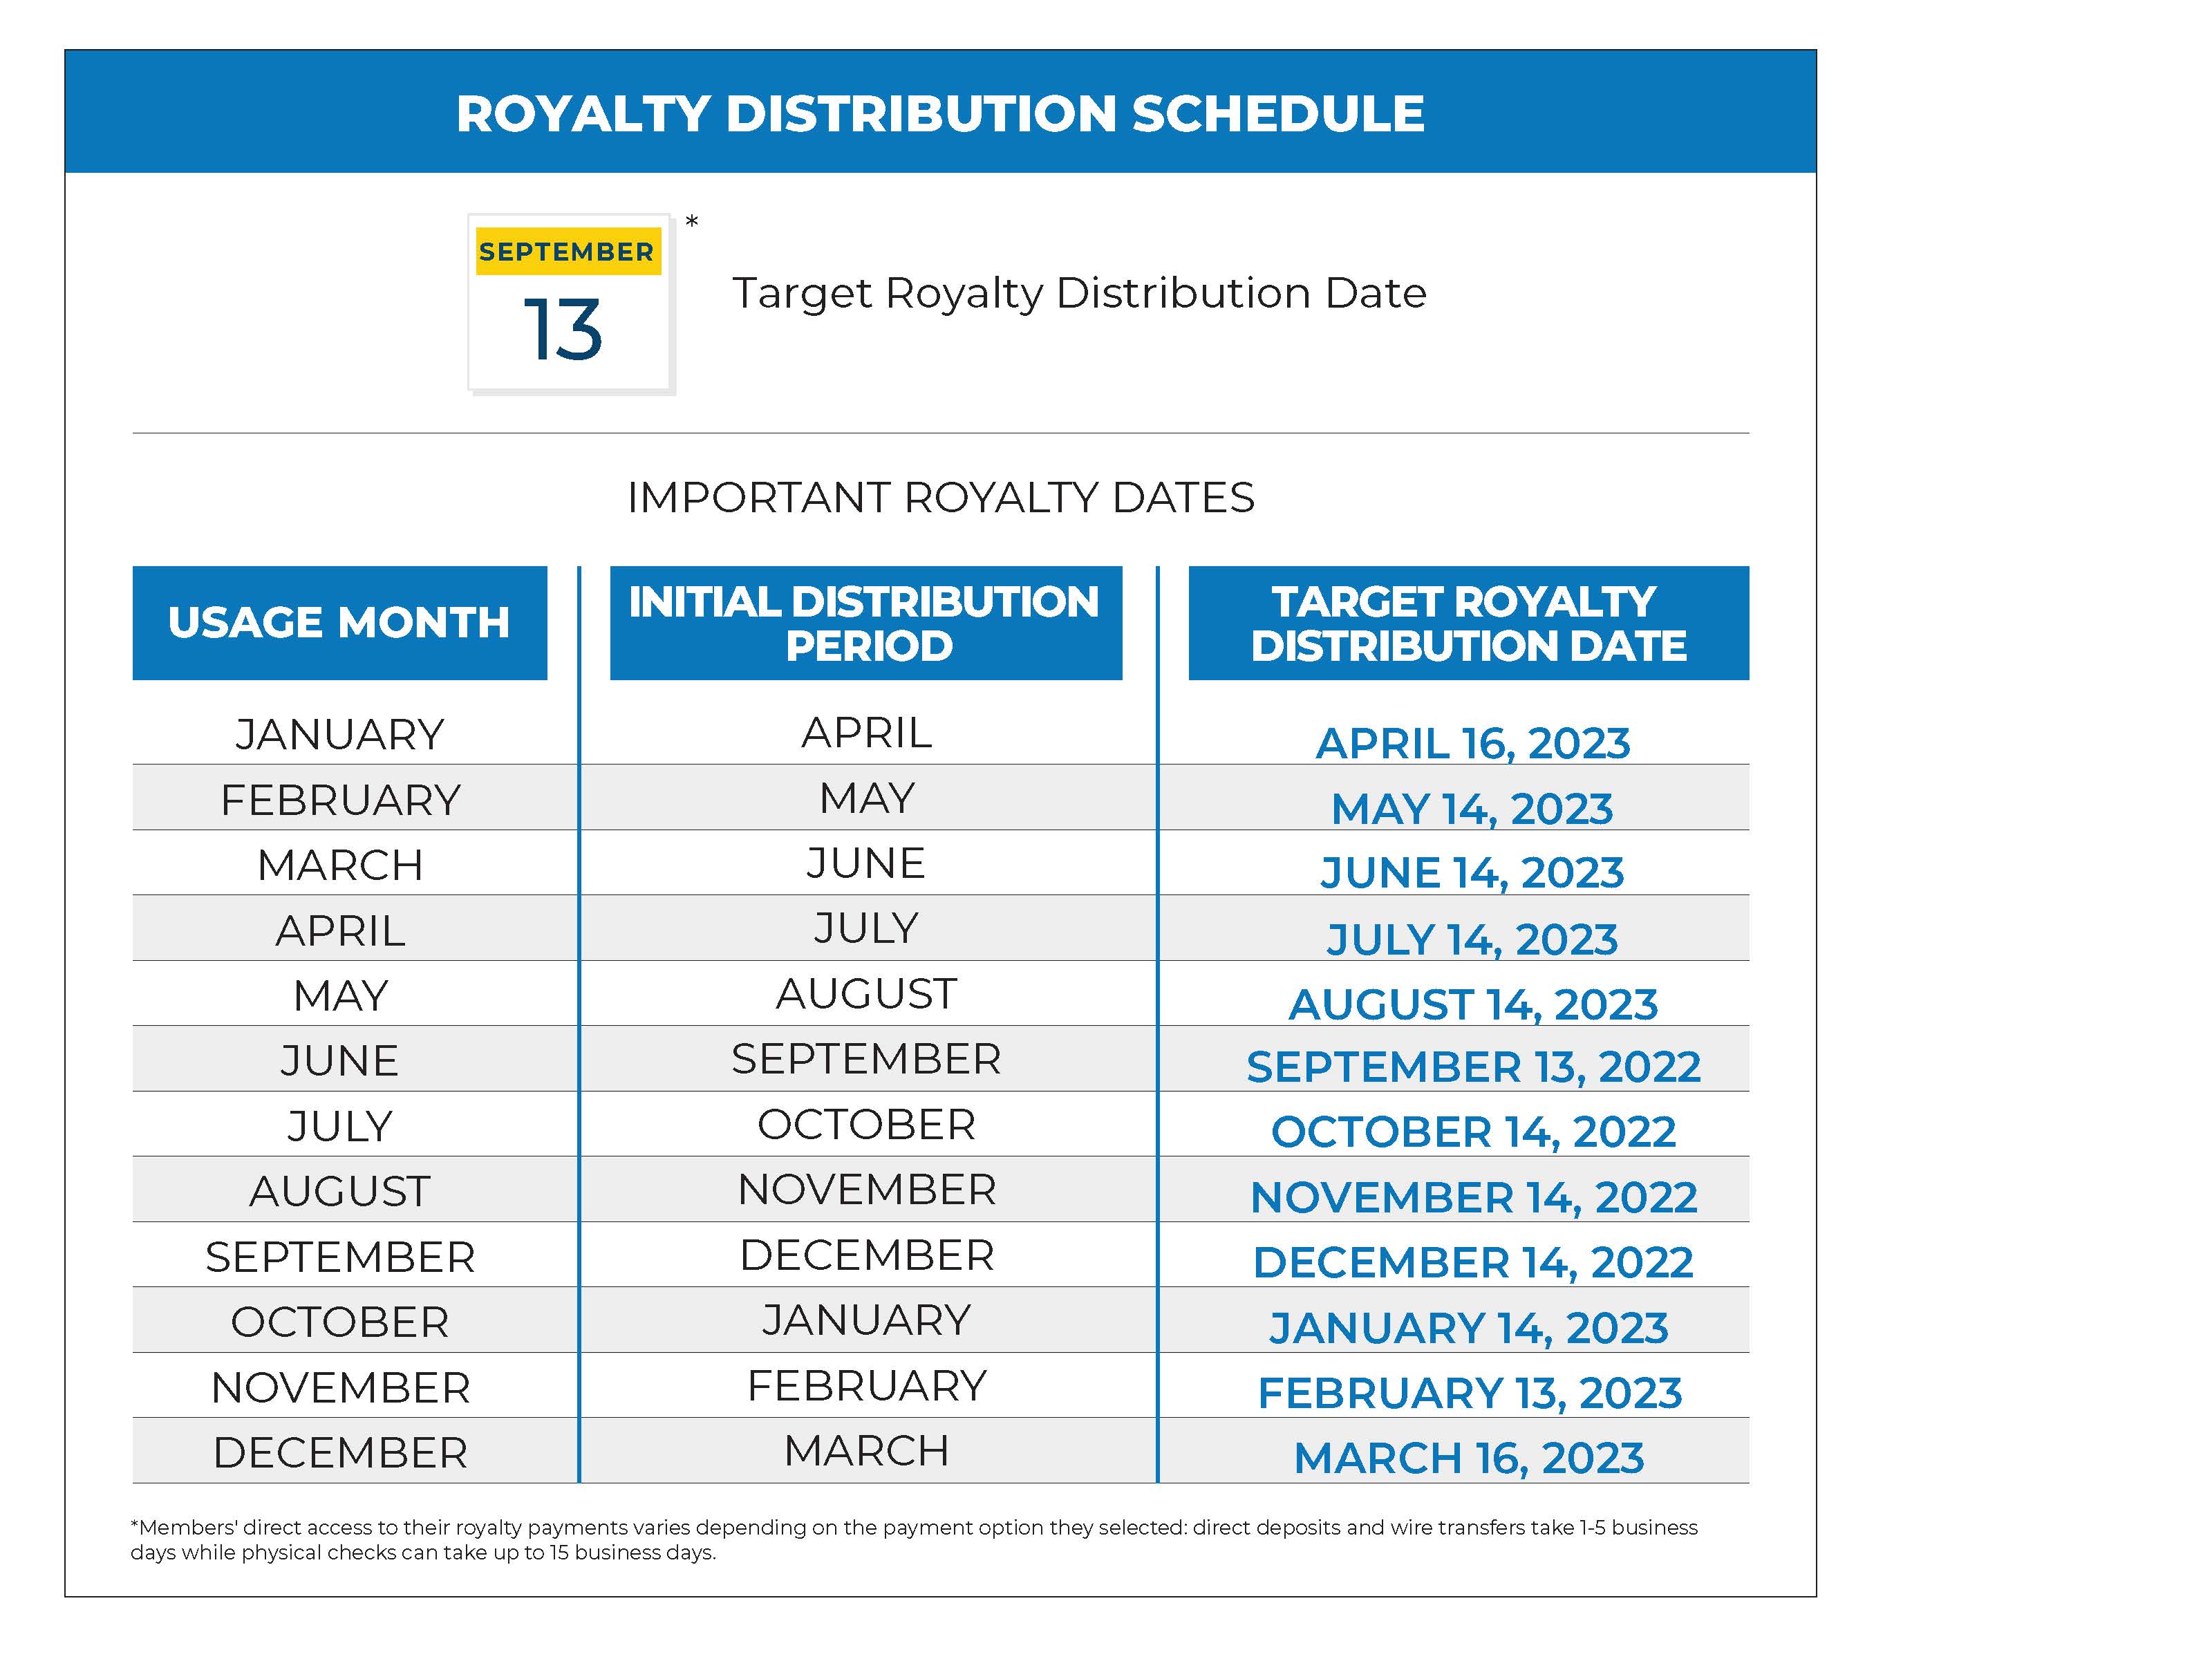 9.13.22 - Royalty Payment Timing Infographic - with Future Date Adjustments